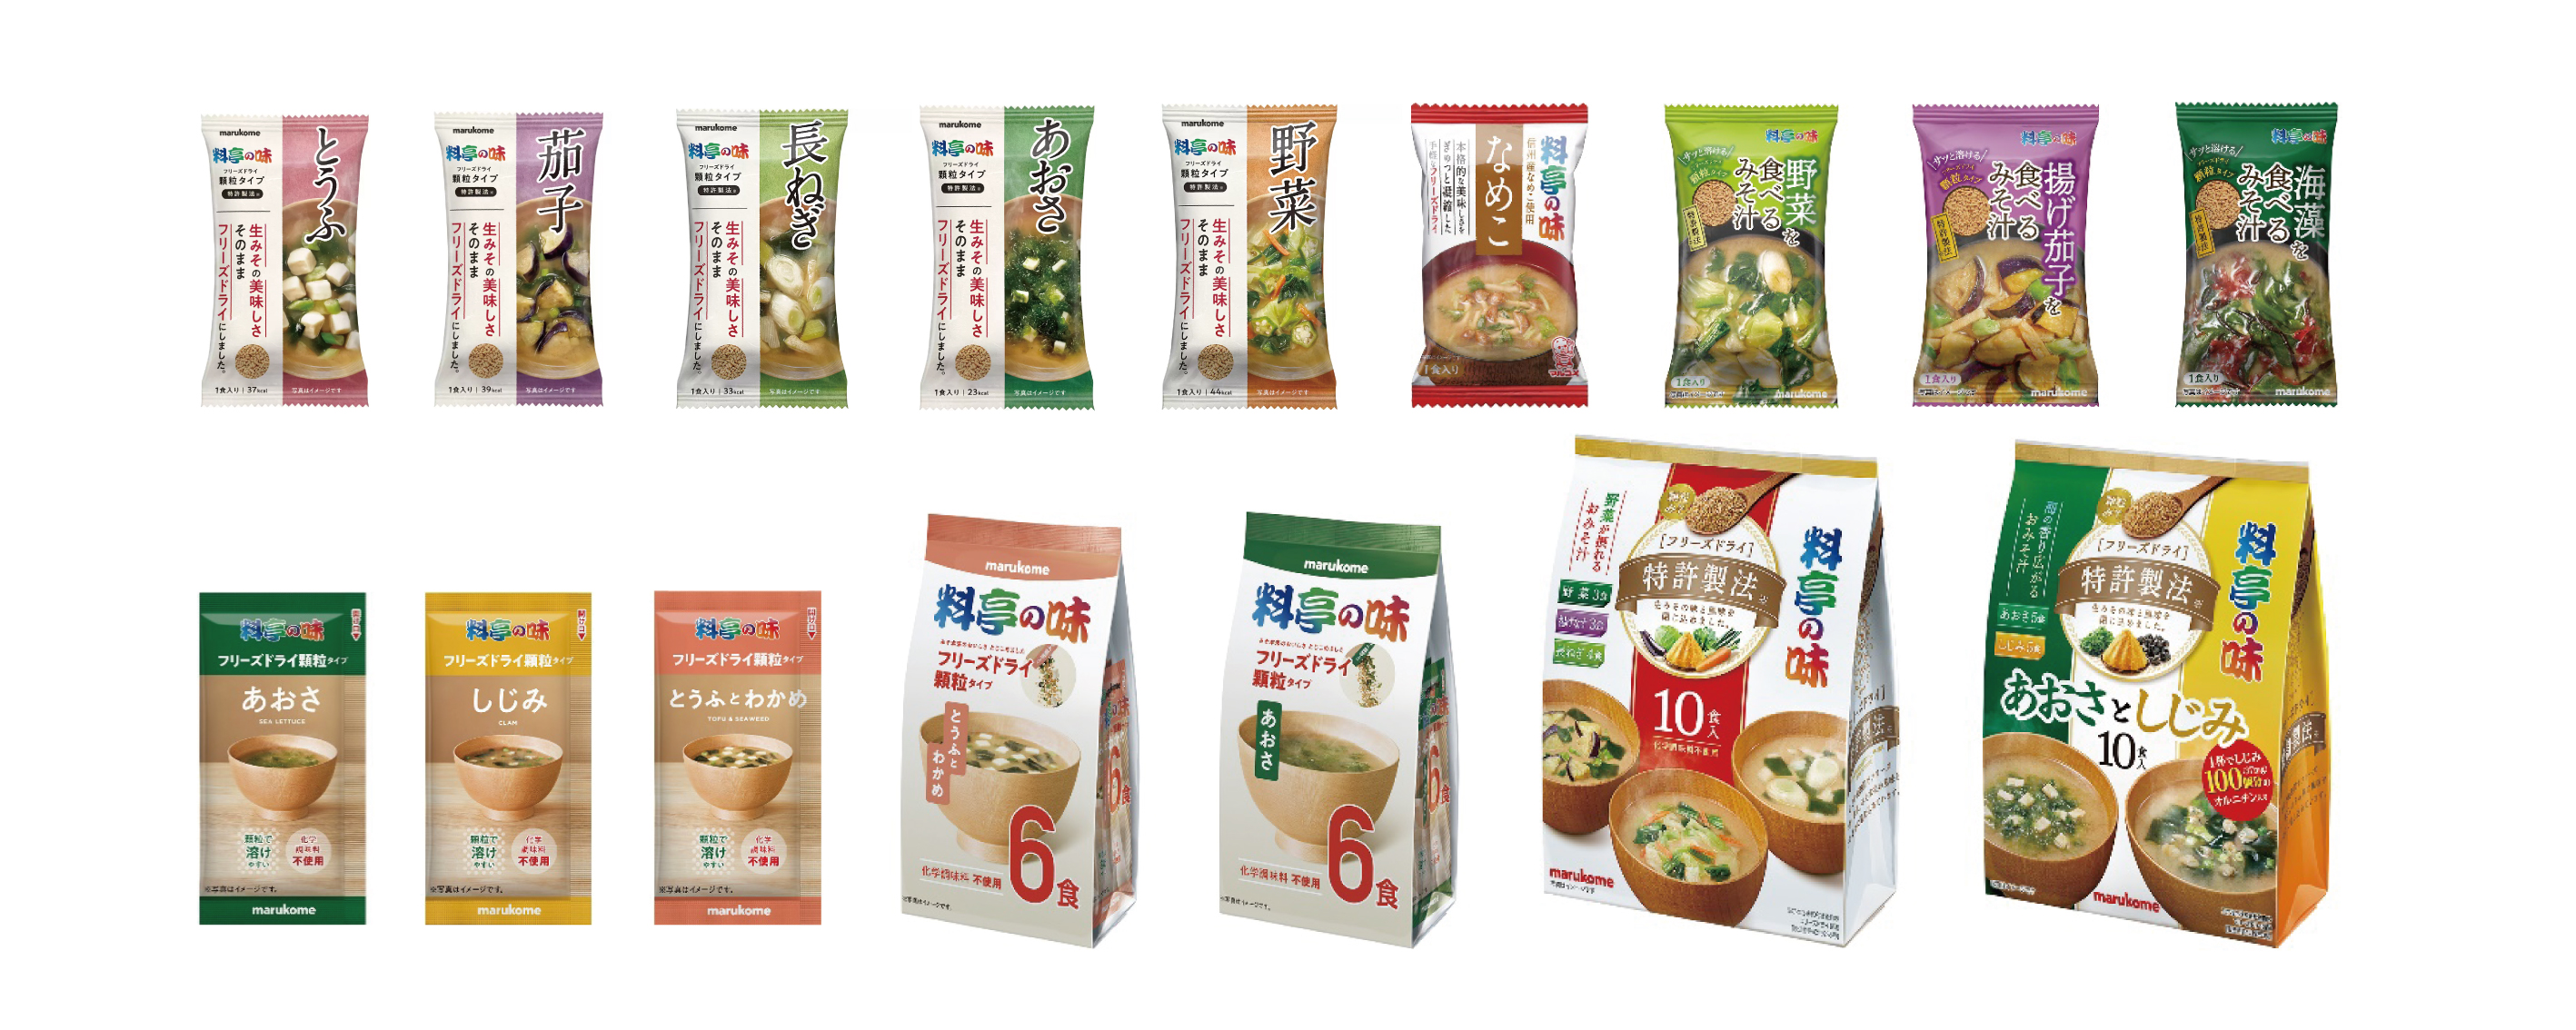 “MARUKOME” Freeze-dried Granulated Instant Miso Soup